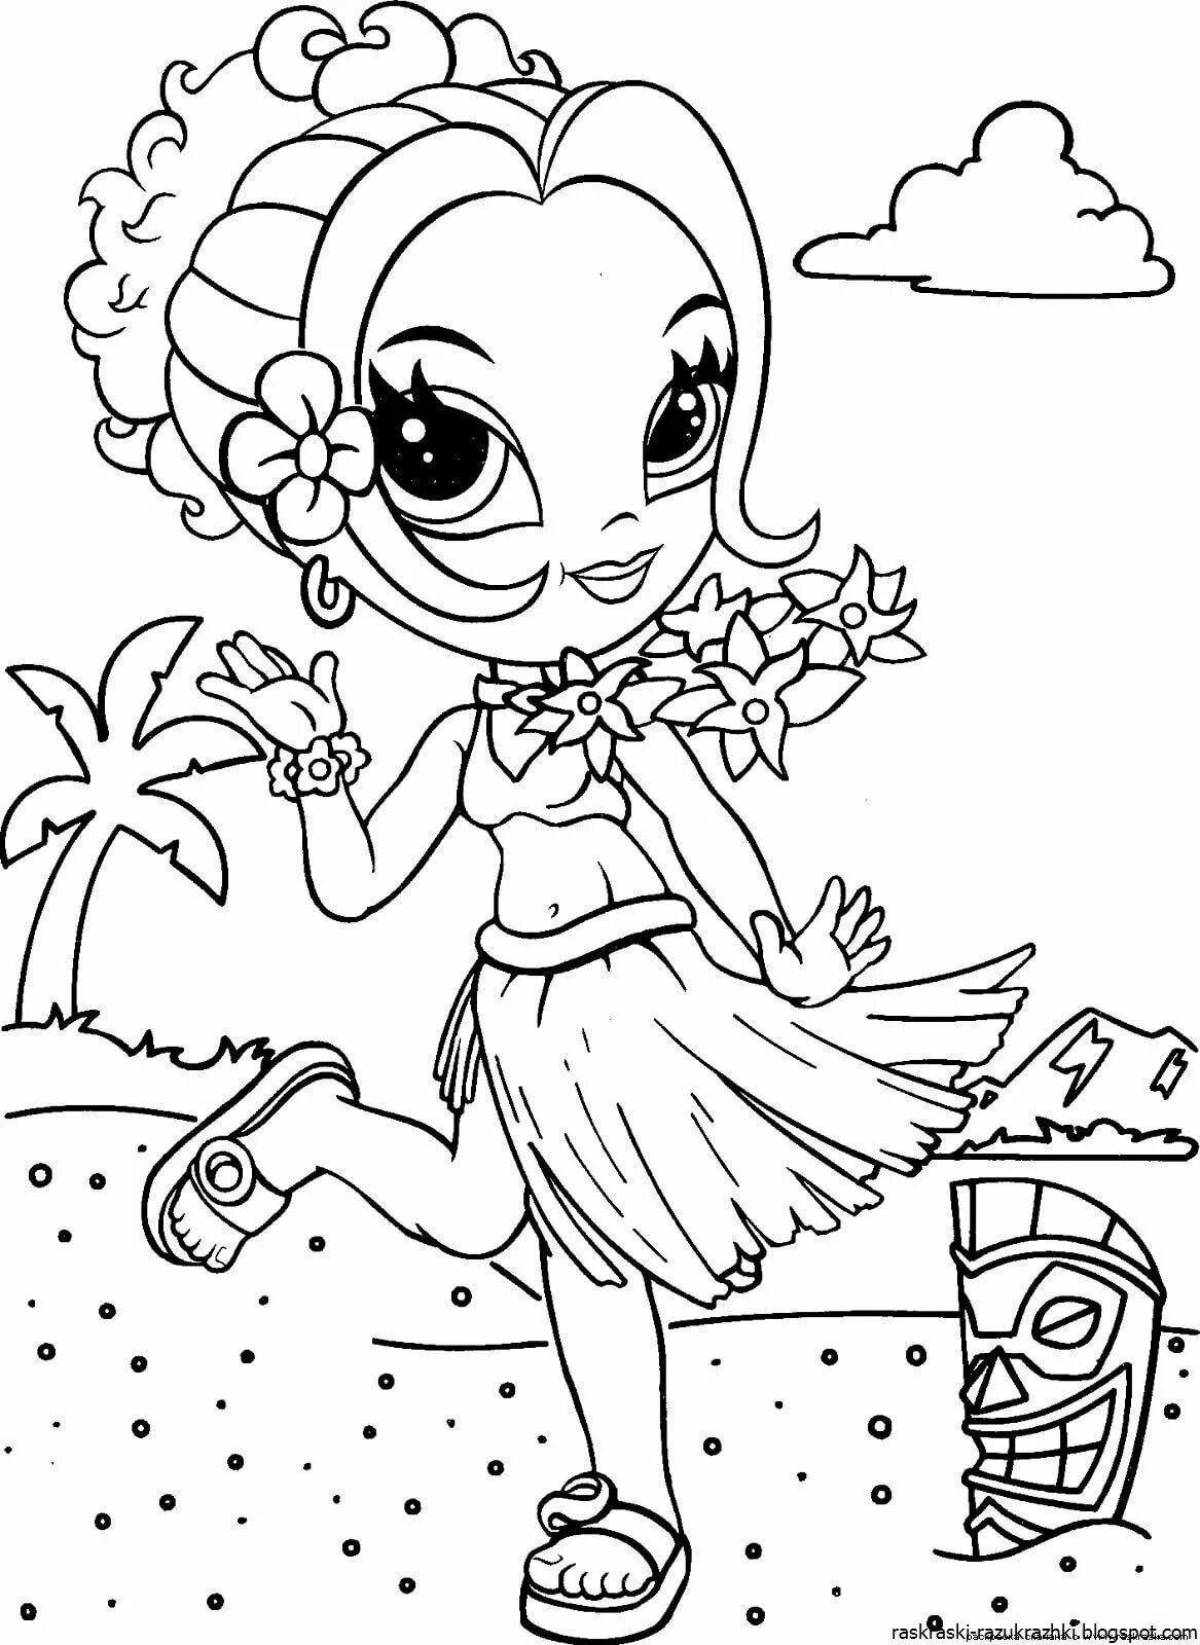 Outstanding coloring book for 5 year olds for girls